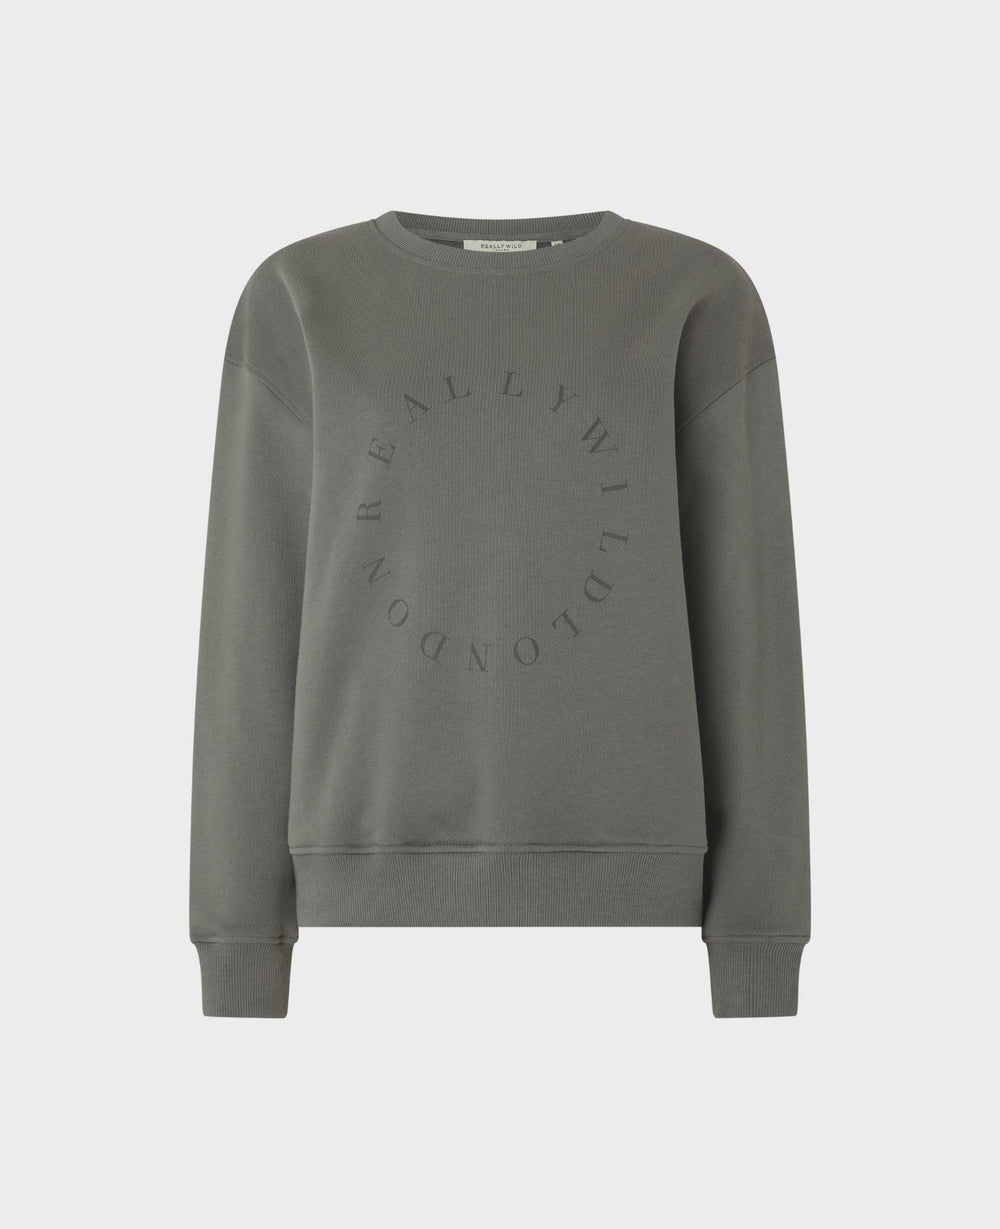 Our Really Wild logo print sweatshirt comes in 100% organic cotton and in grey. Perfect for pairing with denim.